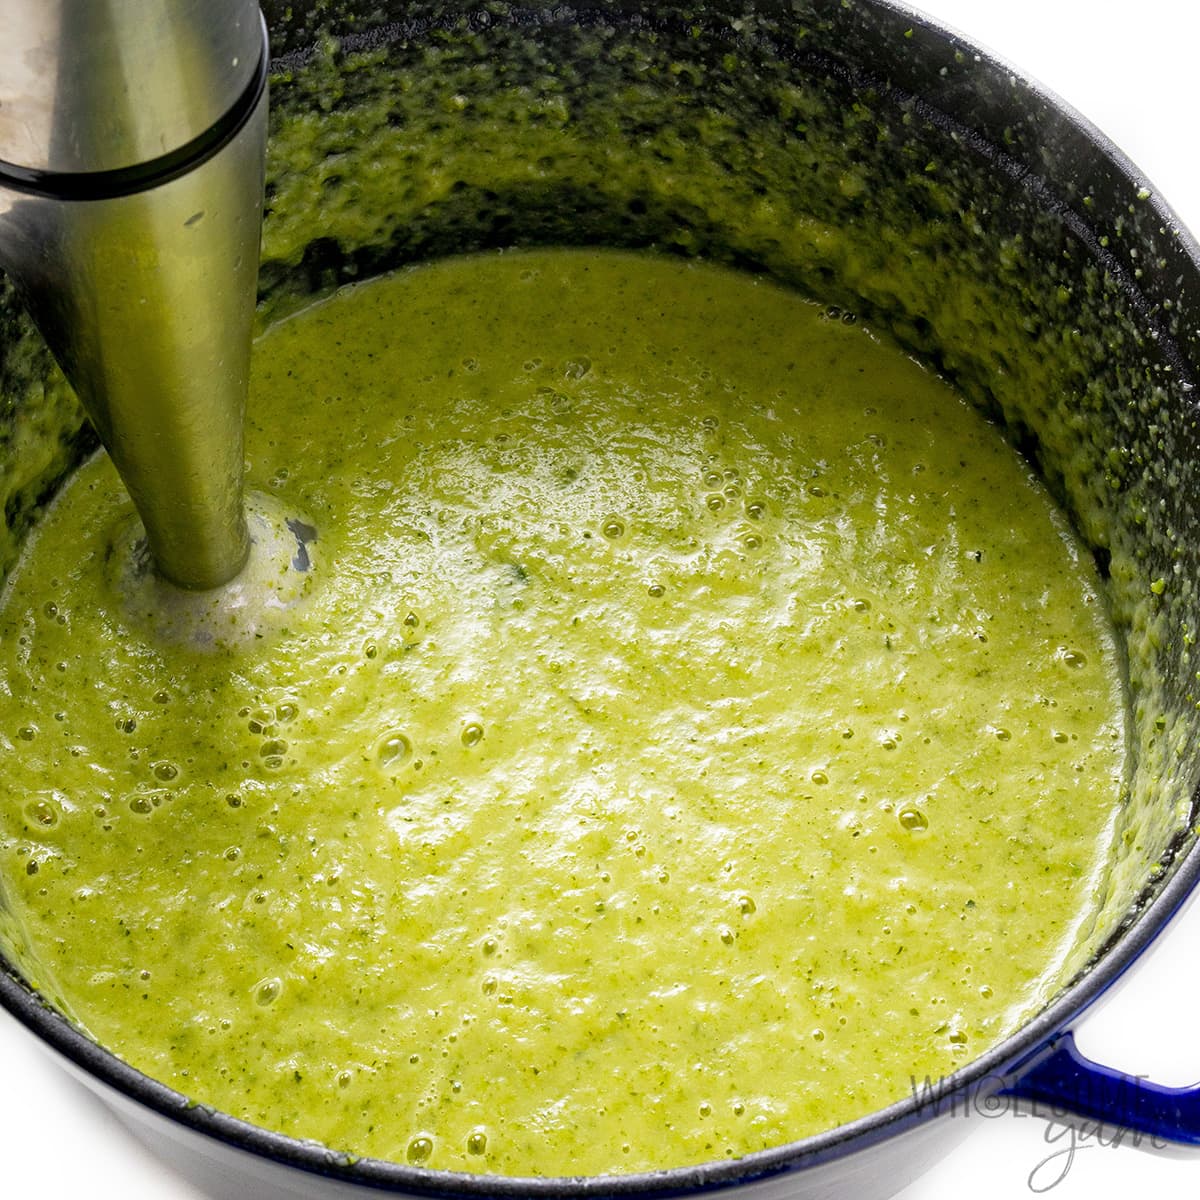 Zucchini soup blended until smooth.